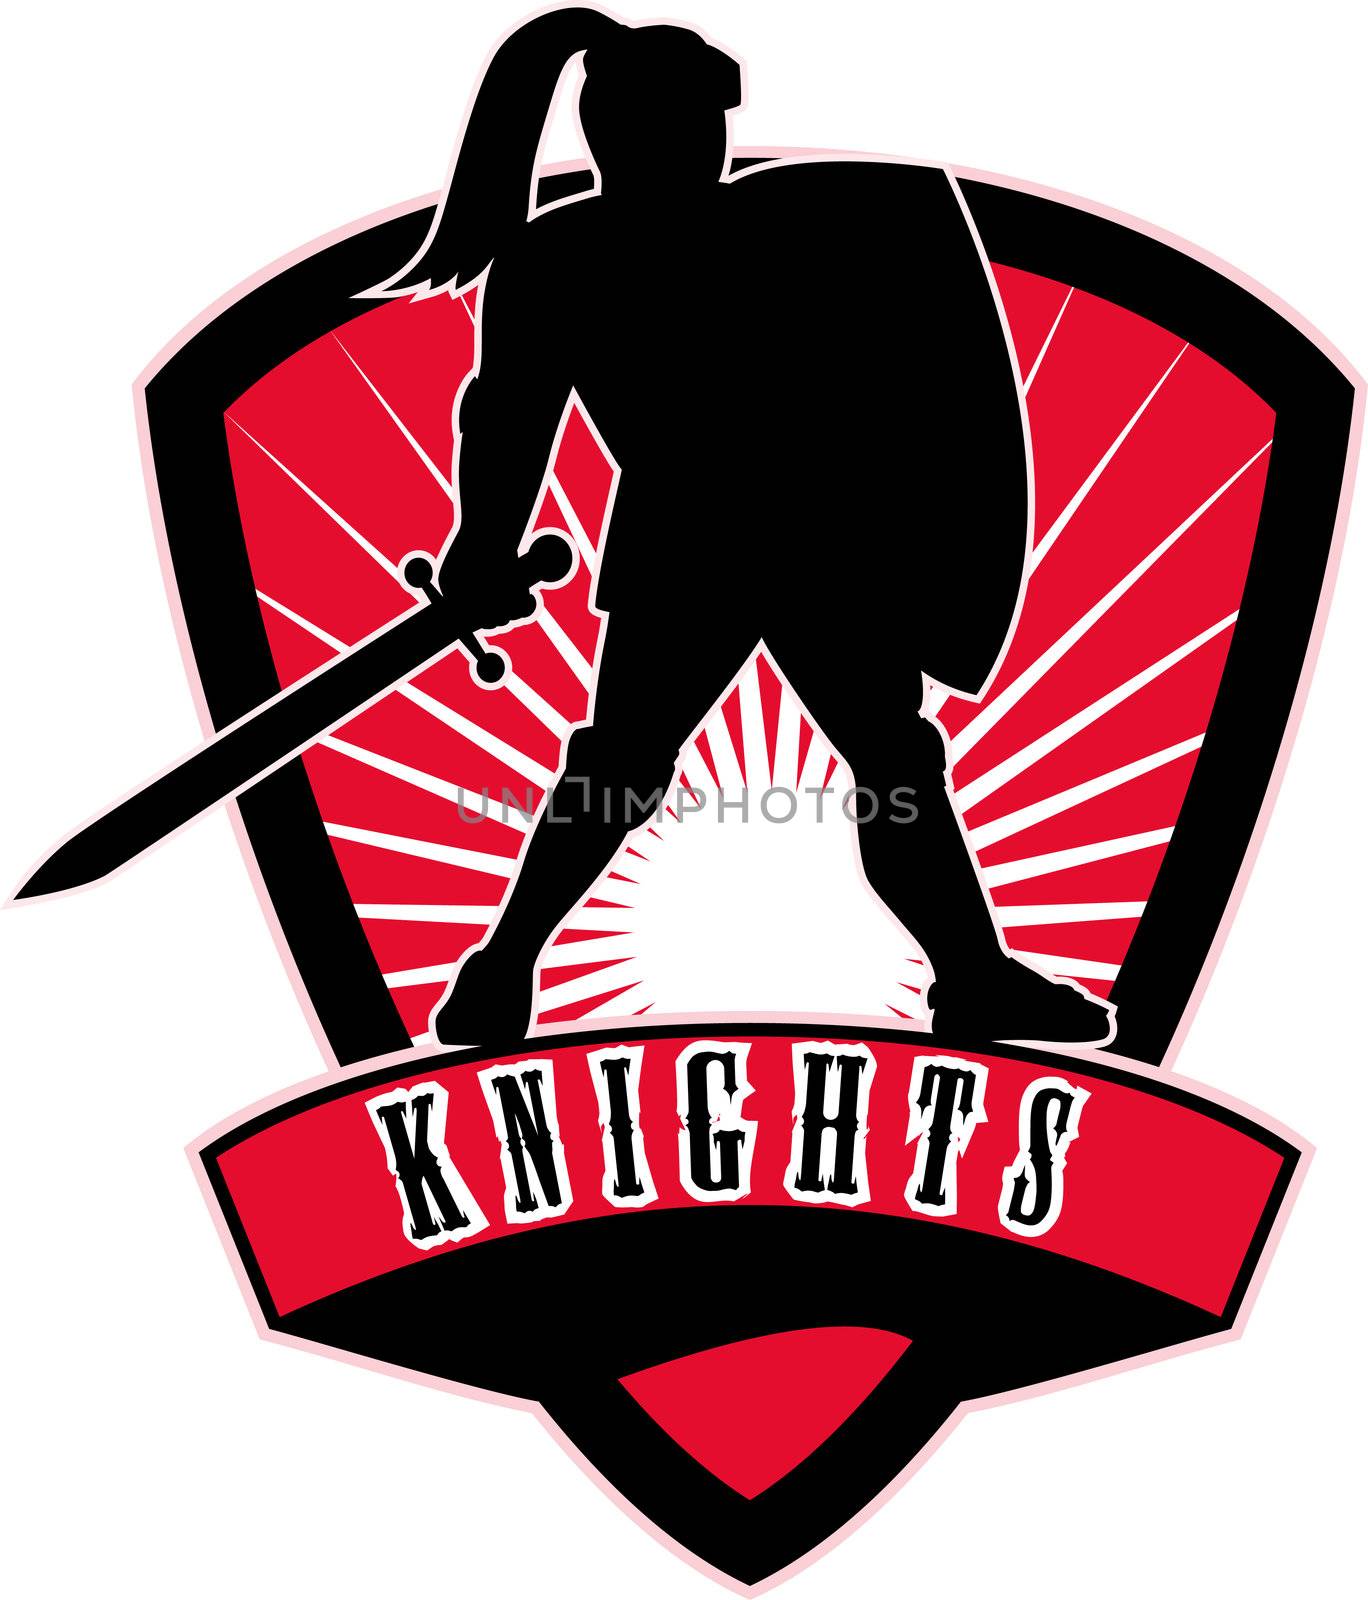 illustration of a Knight silhouette with sword and shield facing side with sunburst in background set inside shield with words "Knights" suitable as mascot for any sports or sporting club or organization